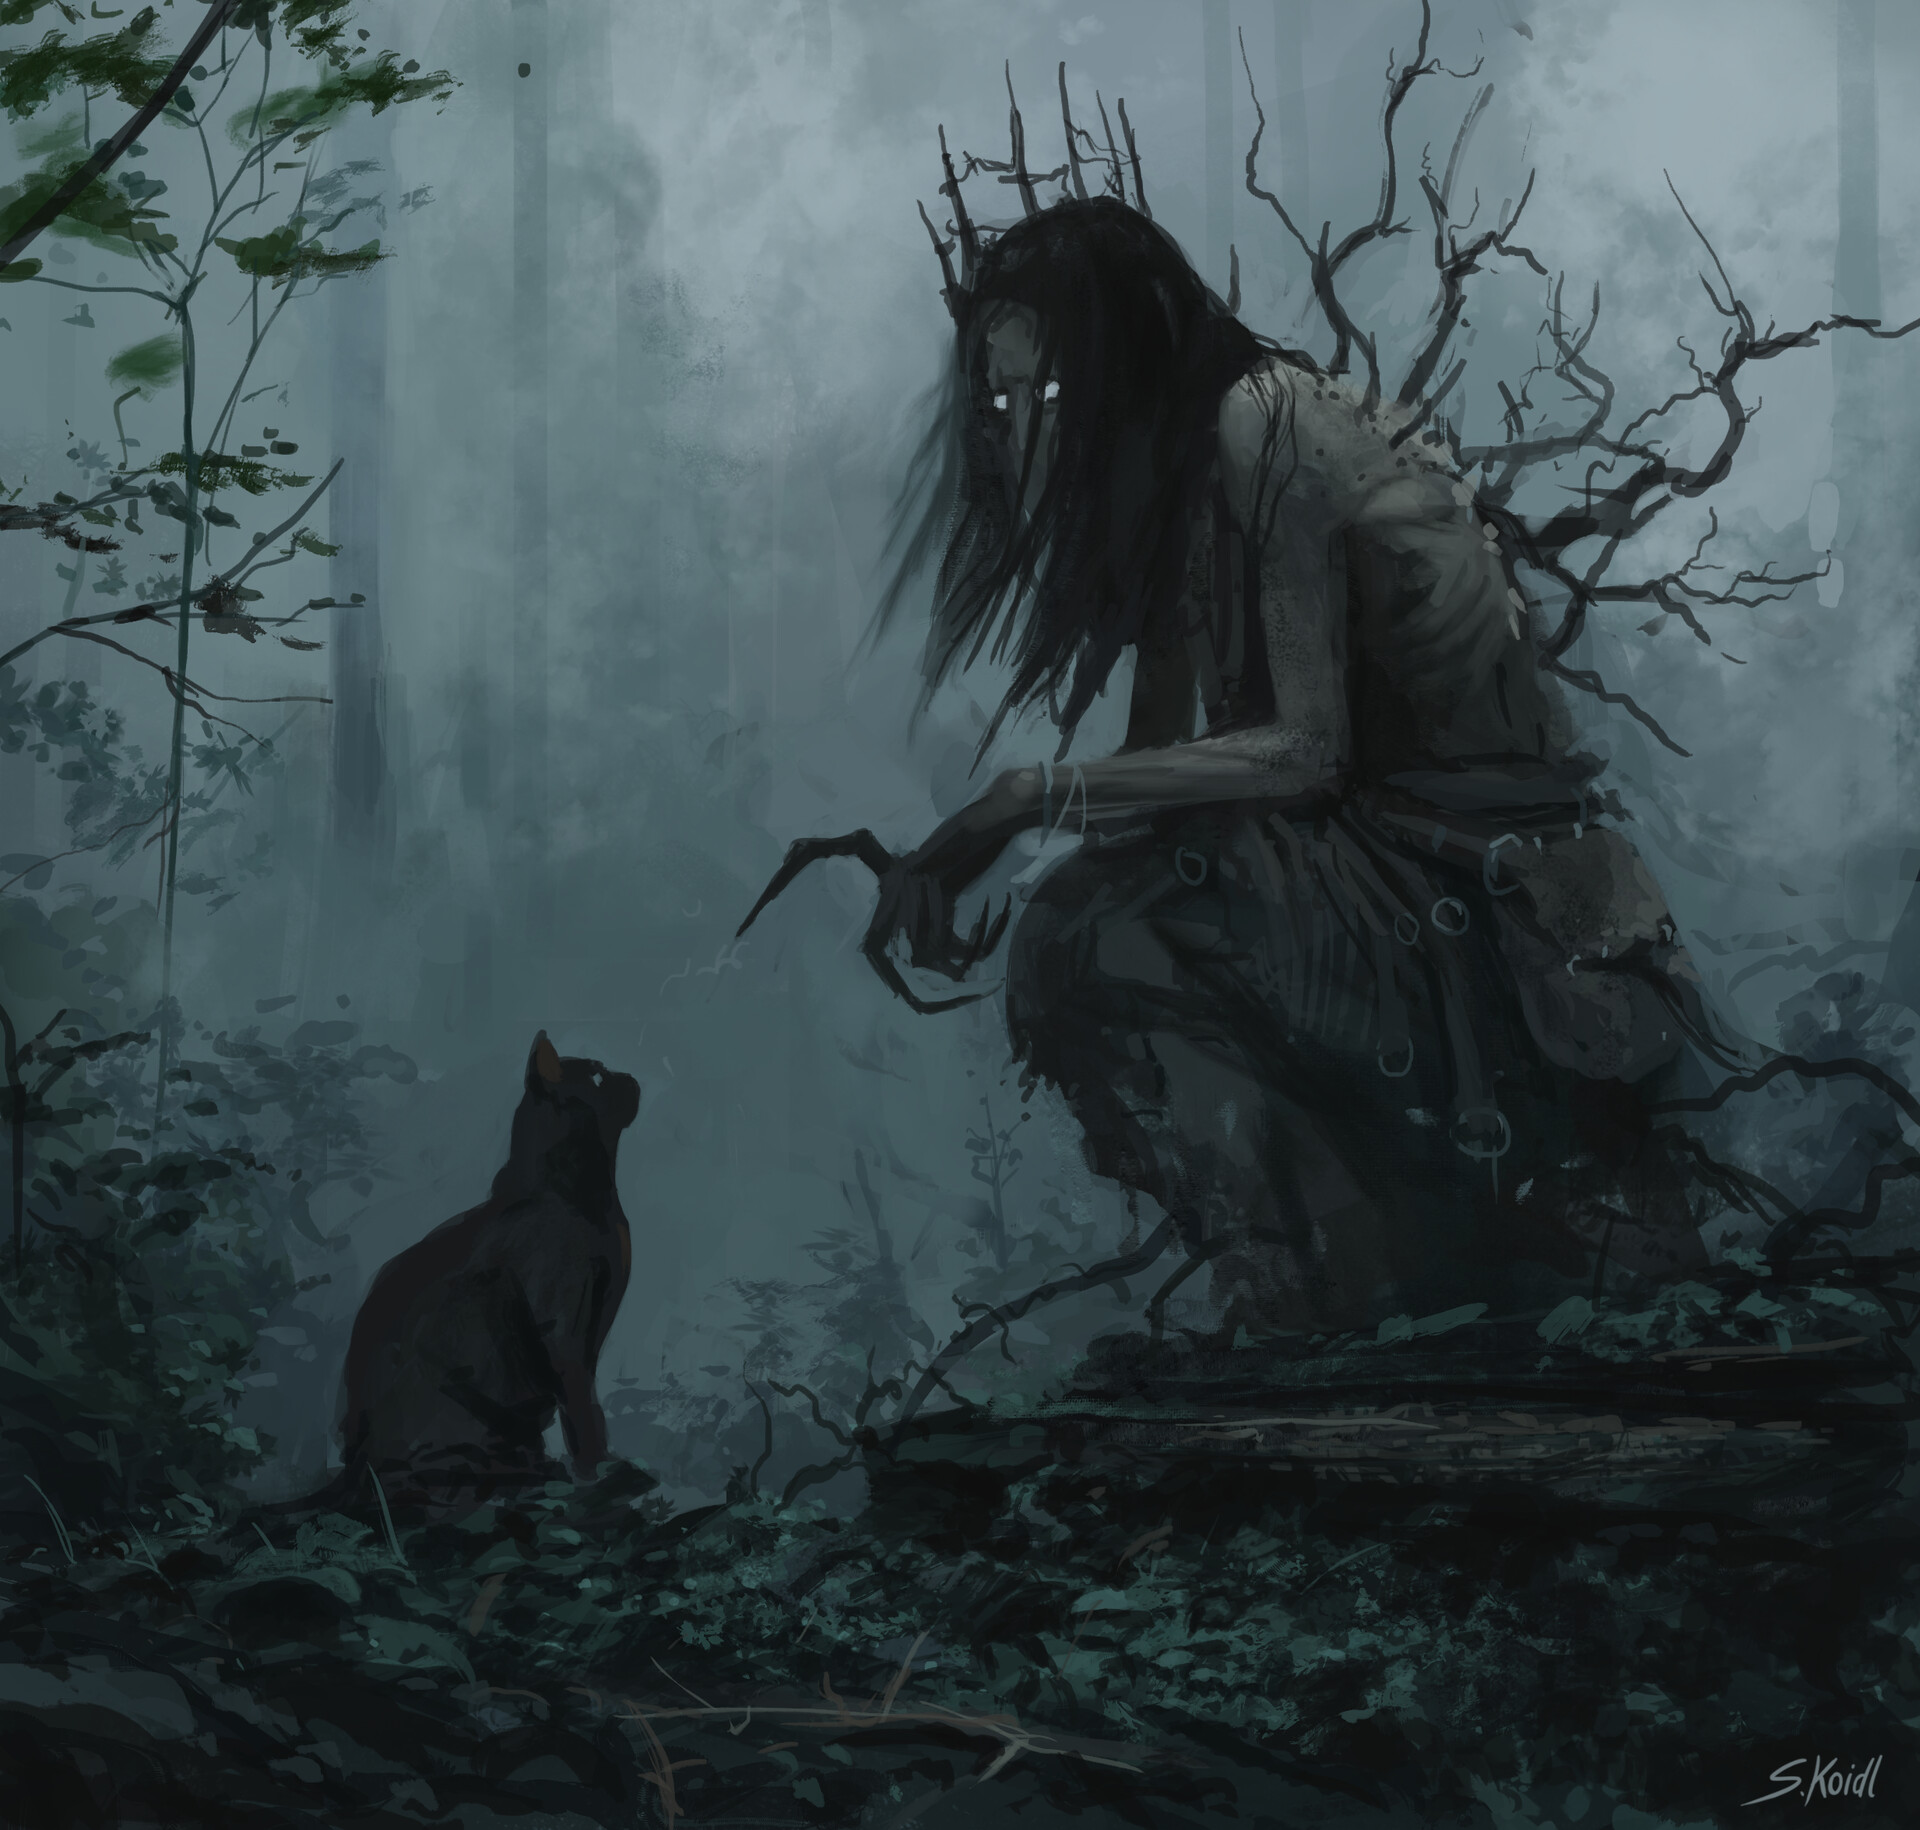 stefan-koidl-hello-there8